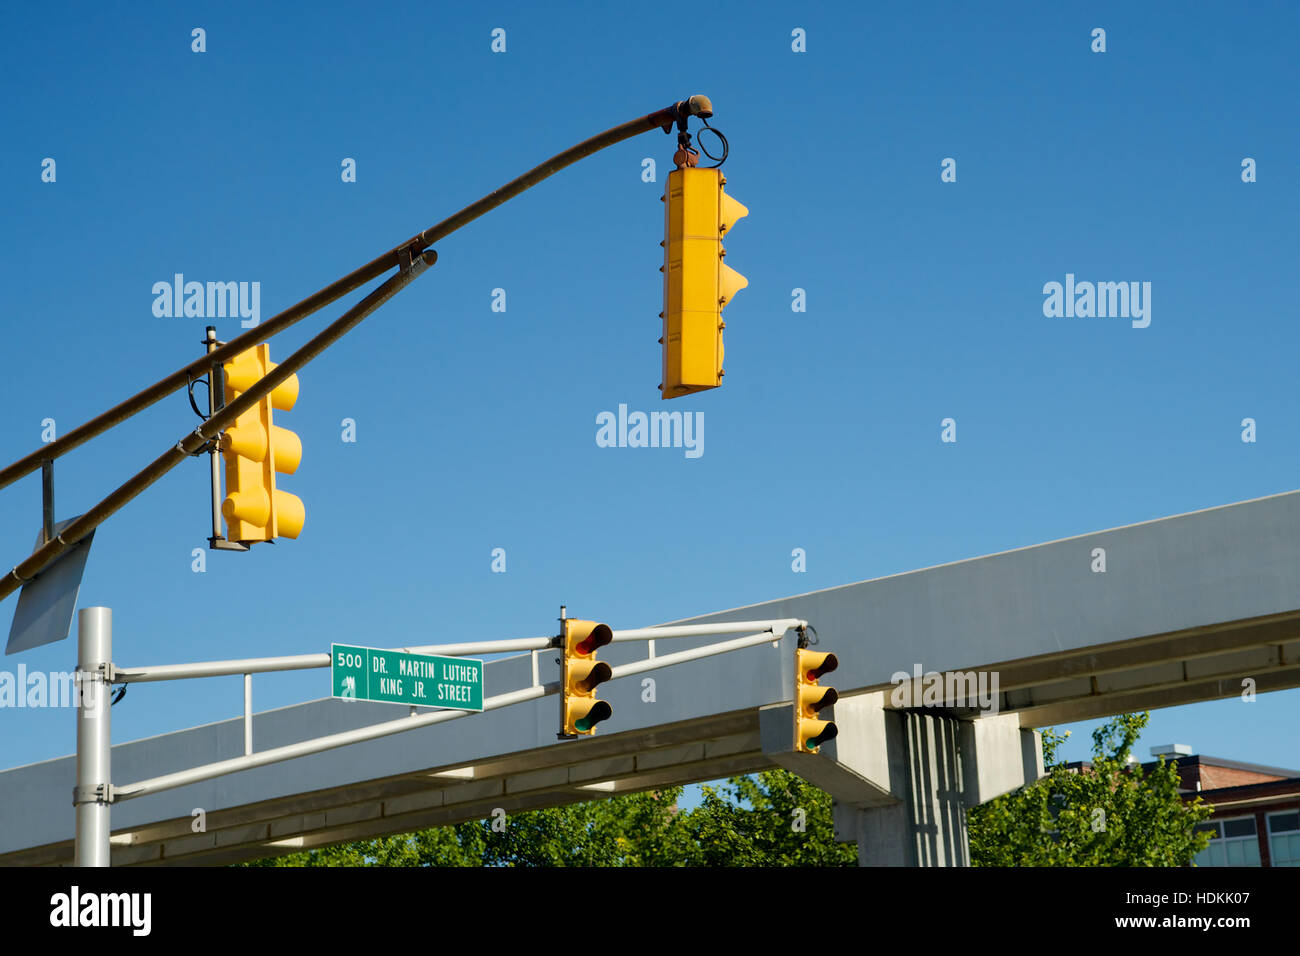 Traffic signals at 500 Dr Martin Luther King Jr Street, Indianapolis, Indiana, USA. Stock Photo